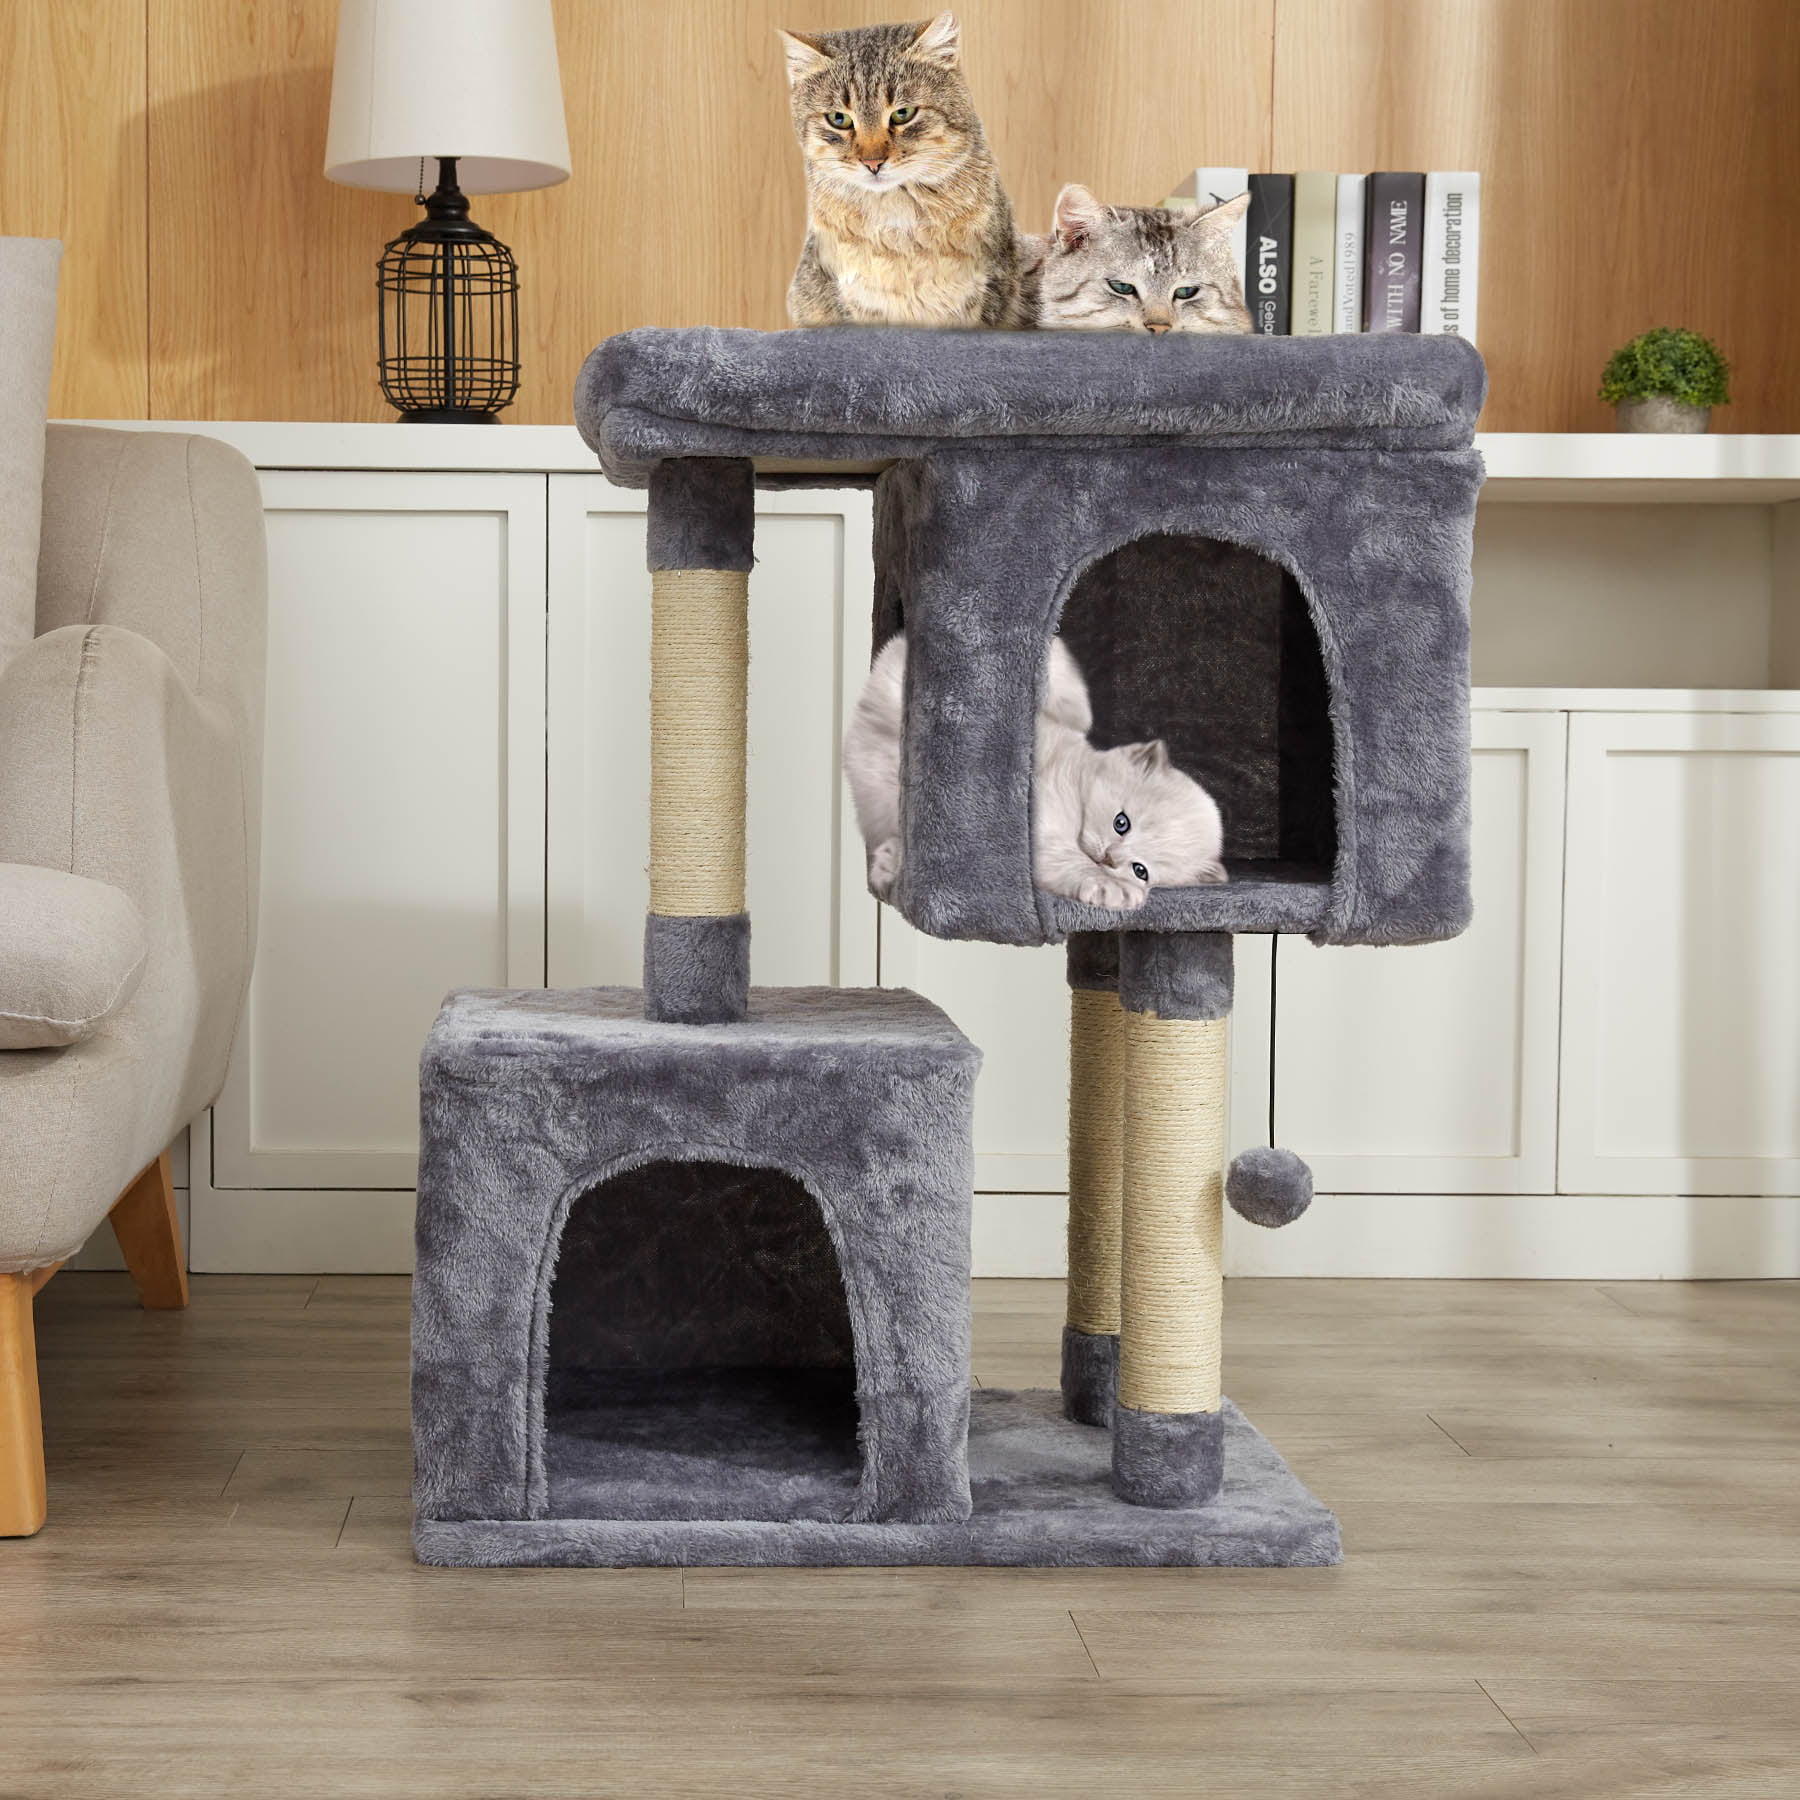 3 Tiers 2 Big Condo House For Multiple Large Cats Indoor With Jungle Gym Cat Toy Walmart Canada